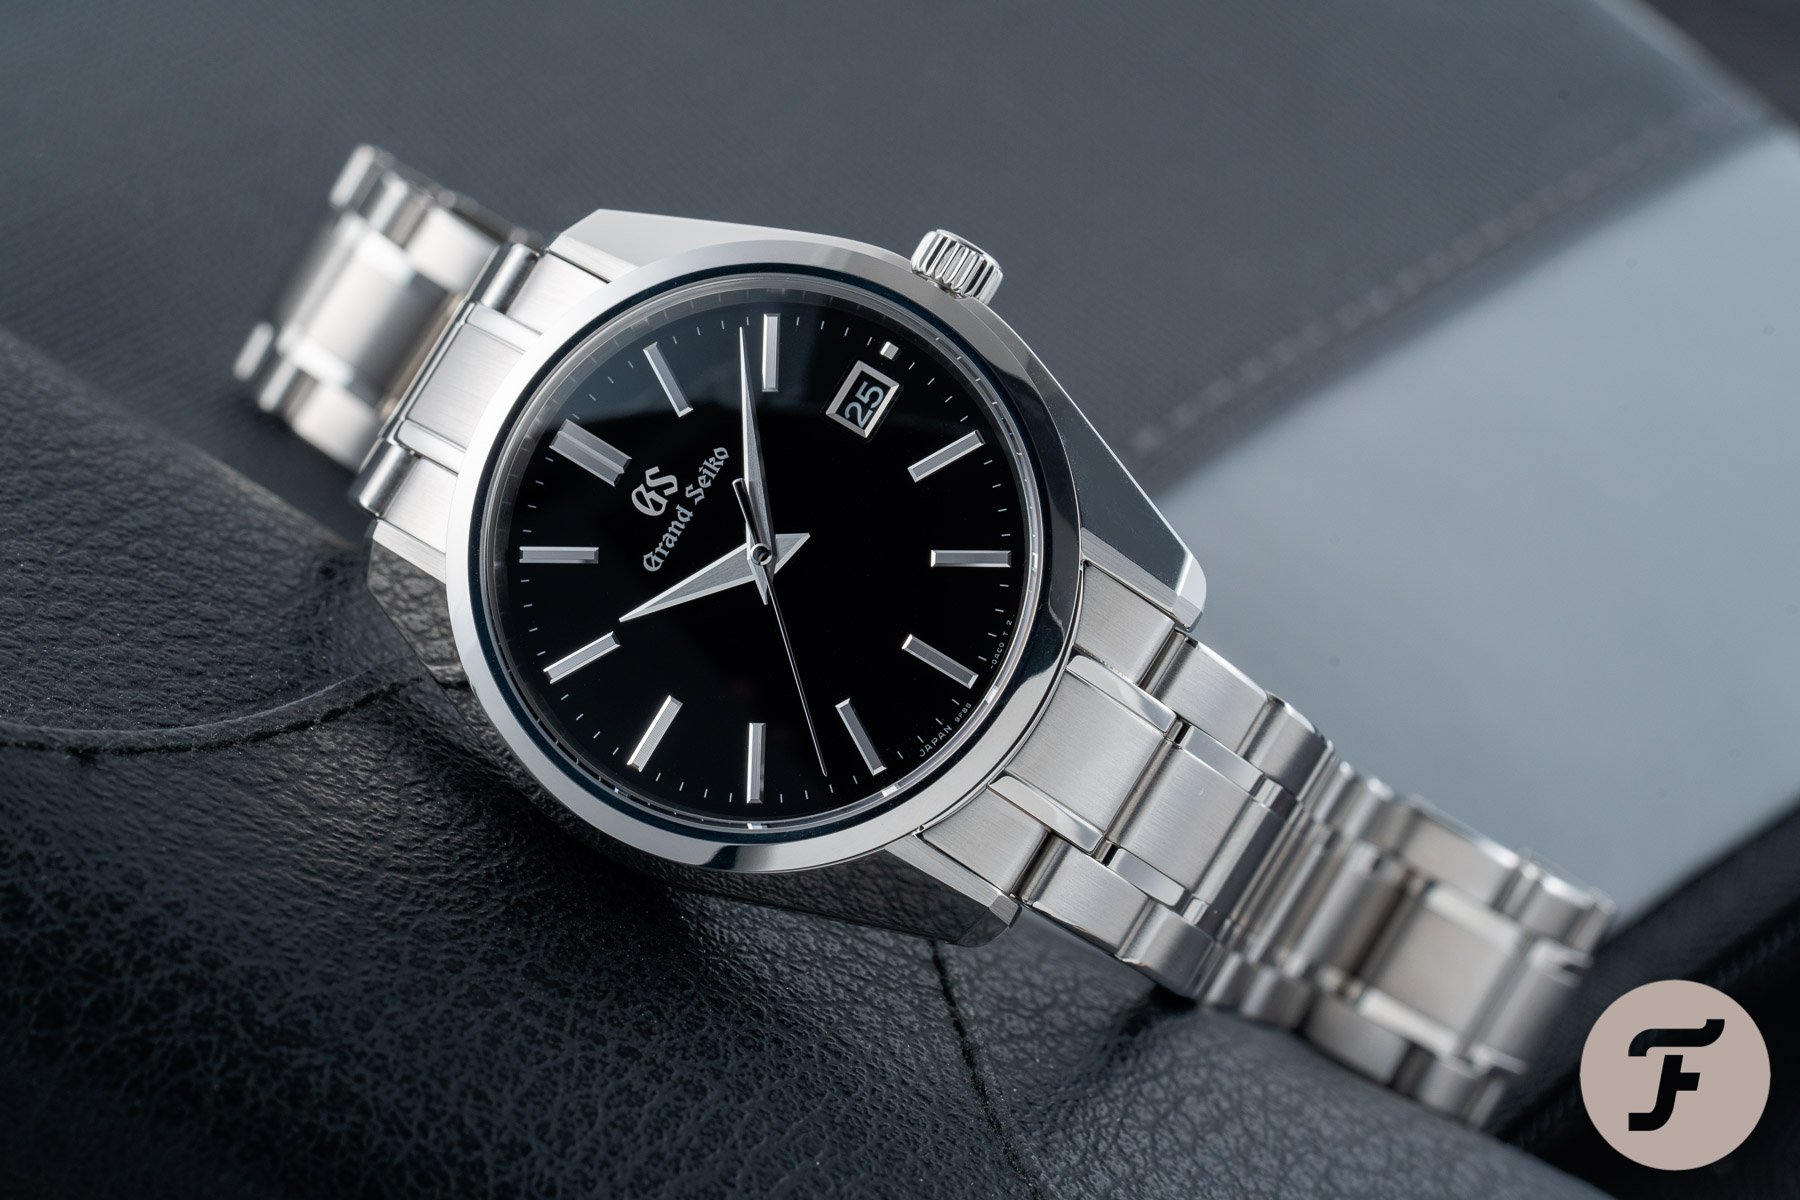 Hands-On With The New Grand Seiko SBGP003 Quartz Watch